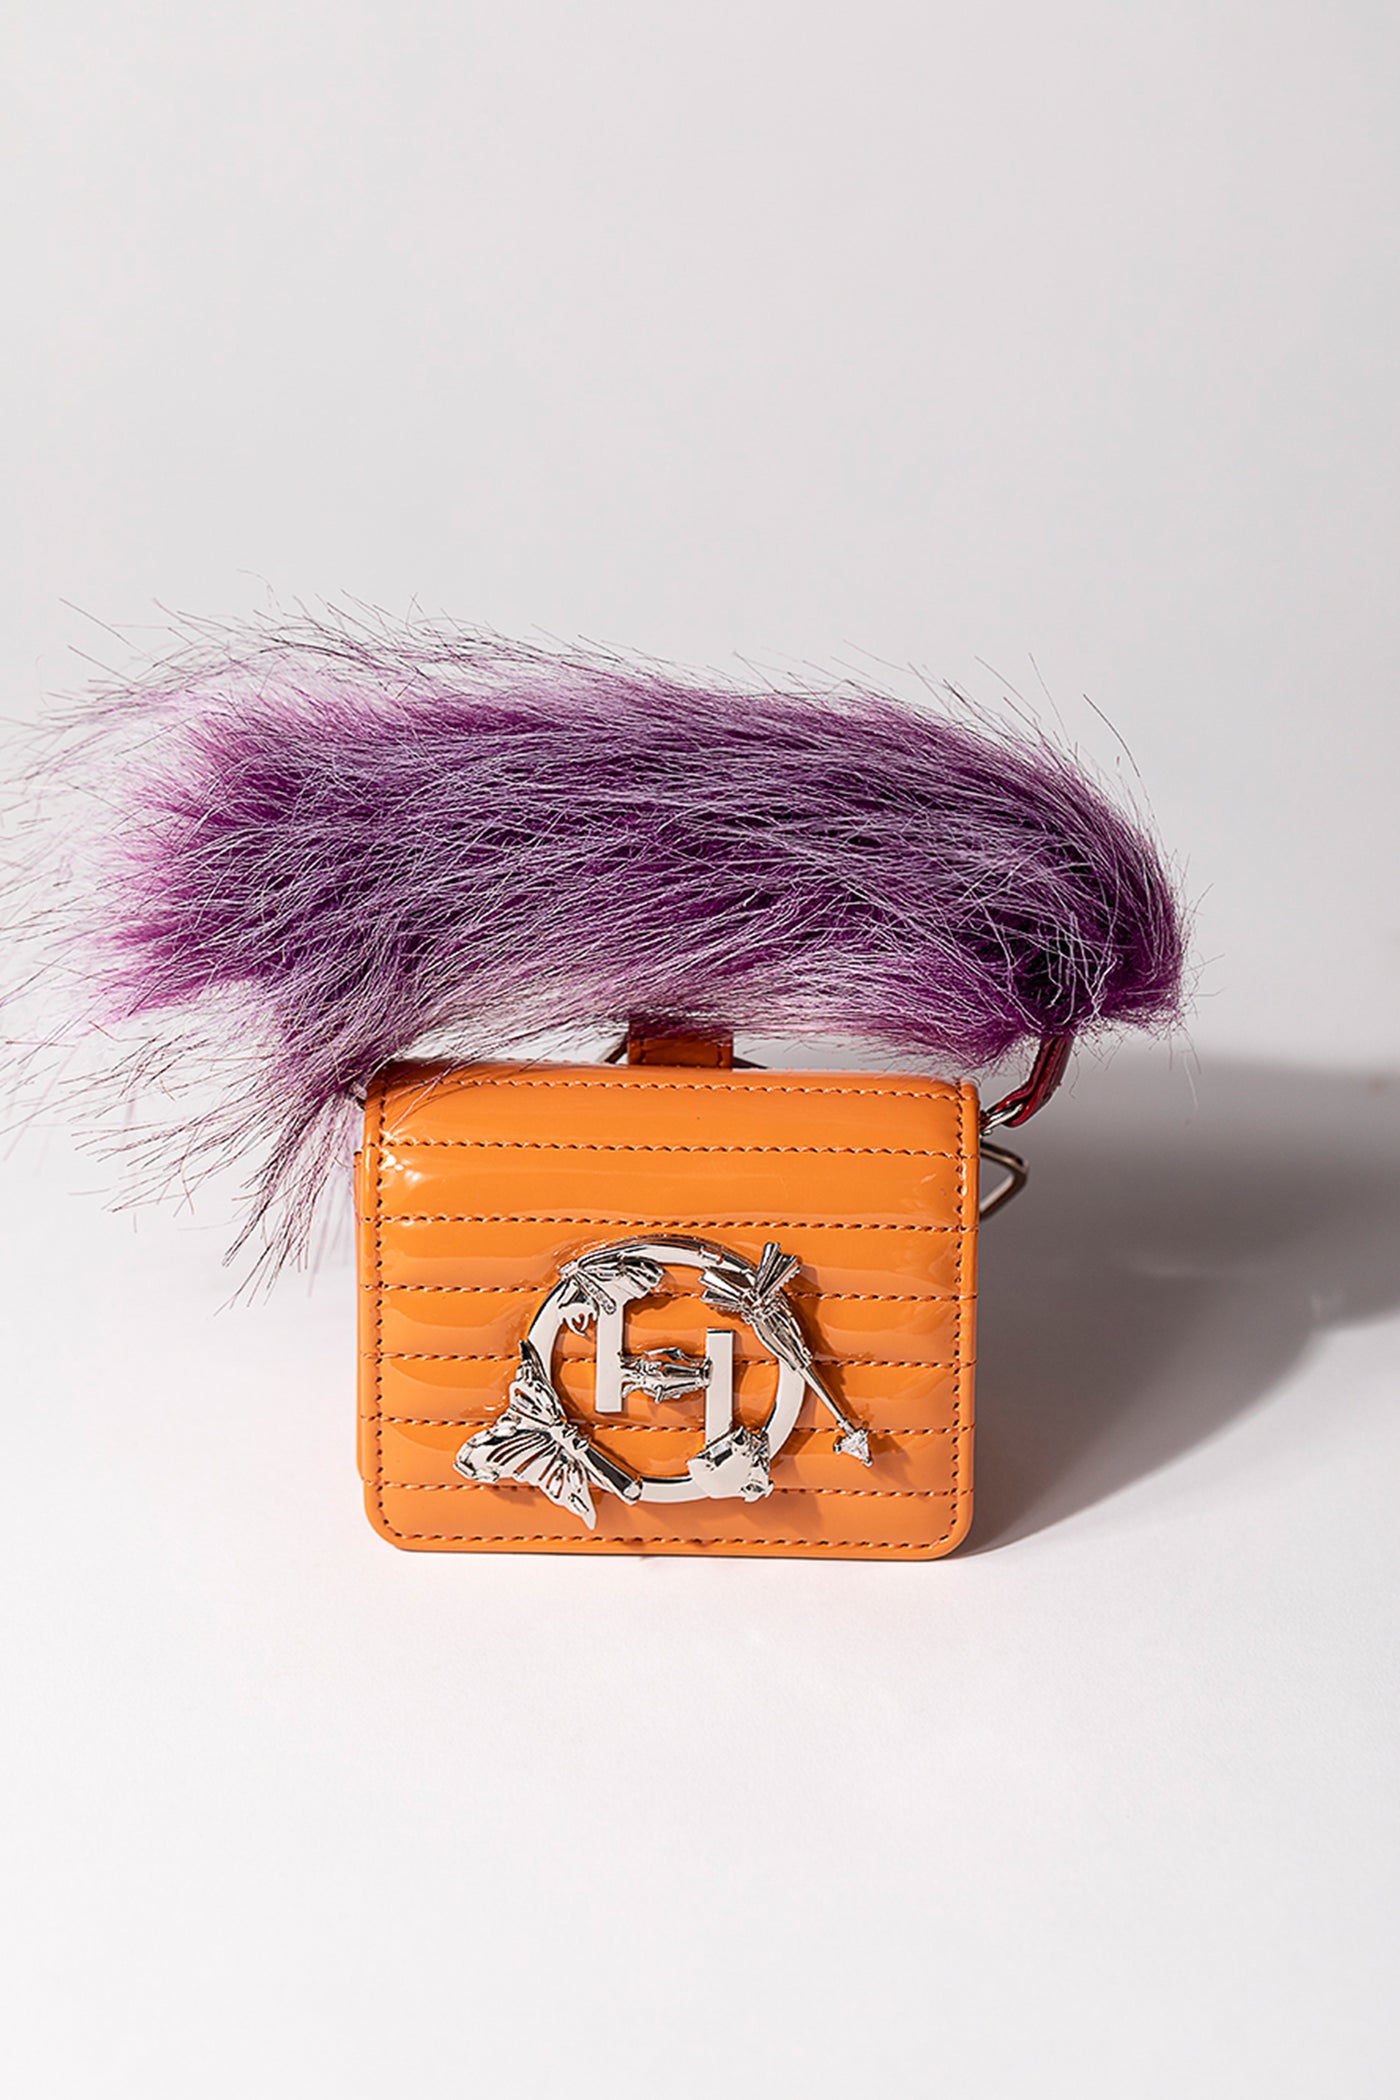 outhouse jewellery The Oh V Furbie - Creamsicle Orange bags accessories online shopping melange singapore indian designer wear